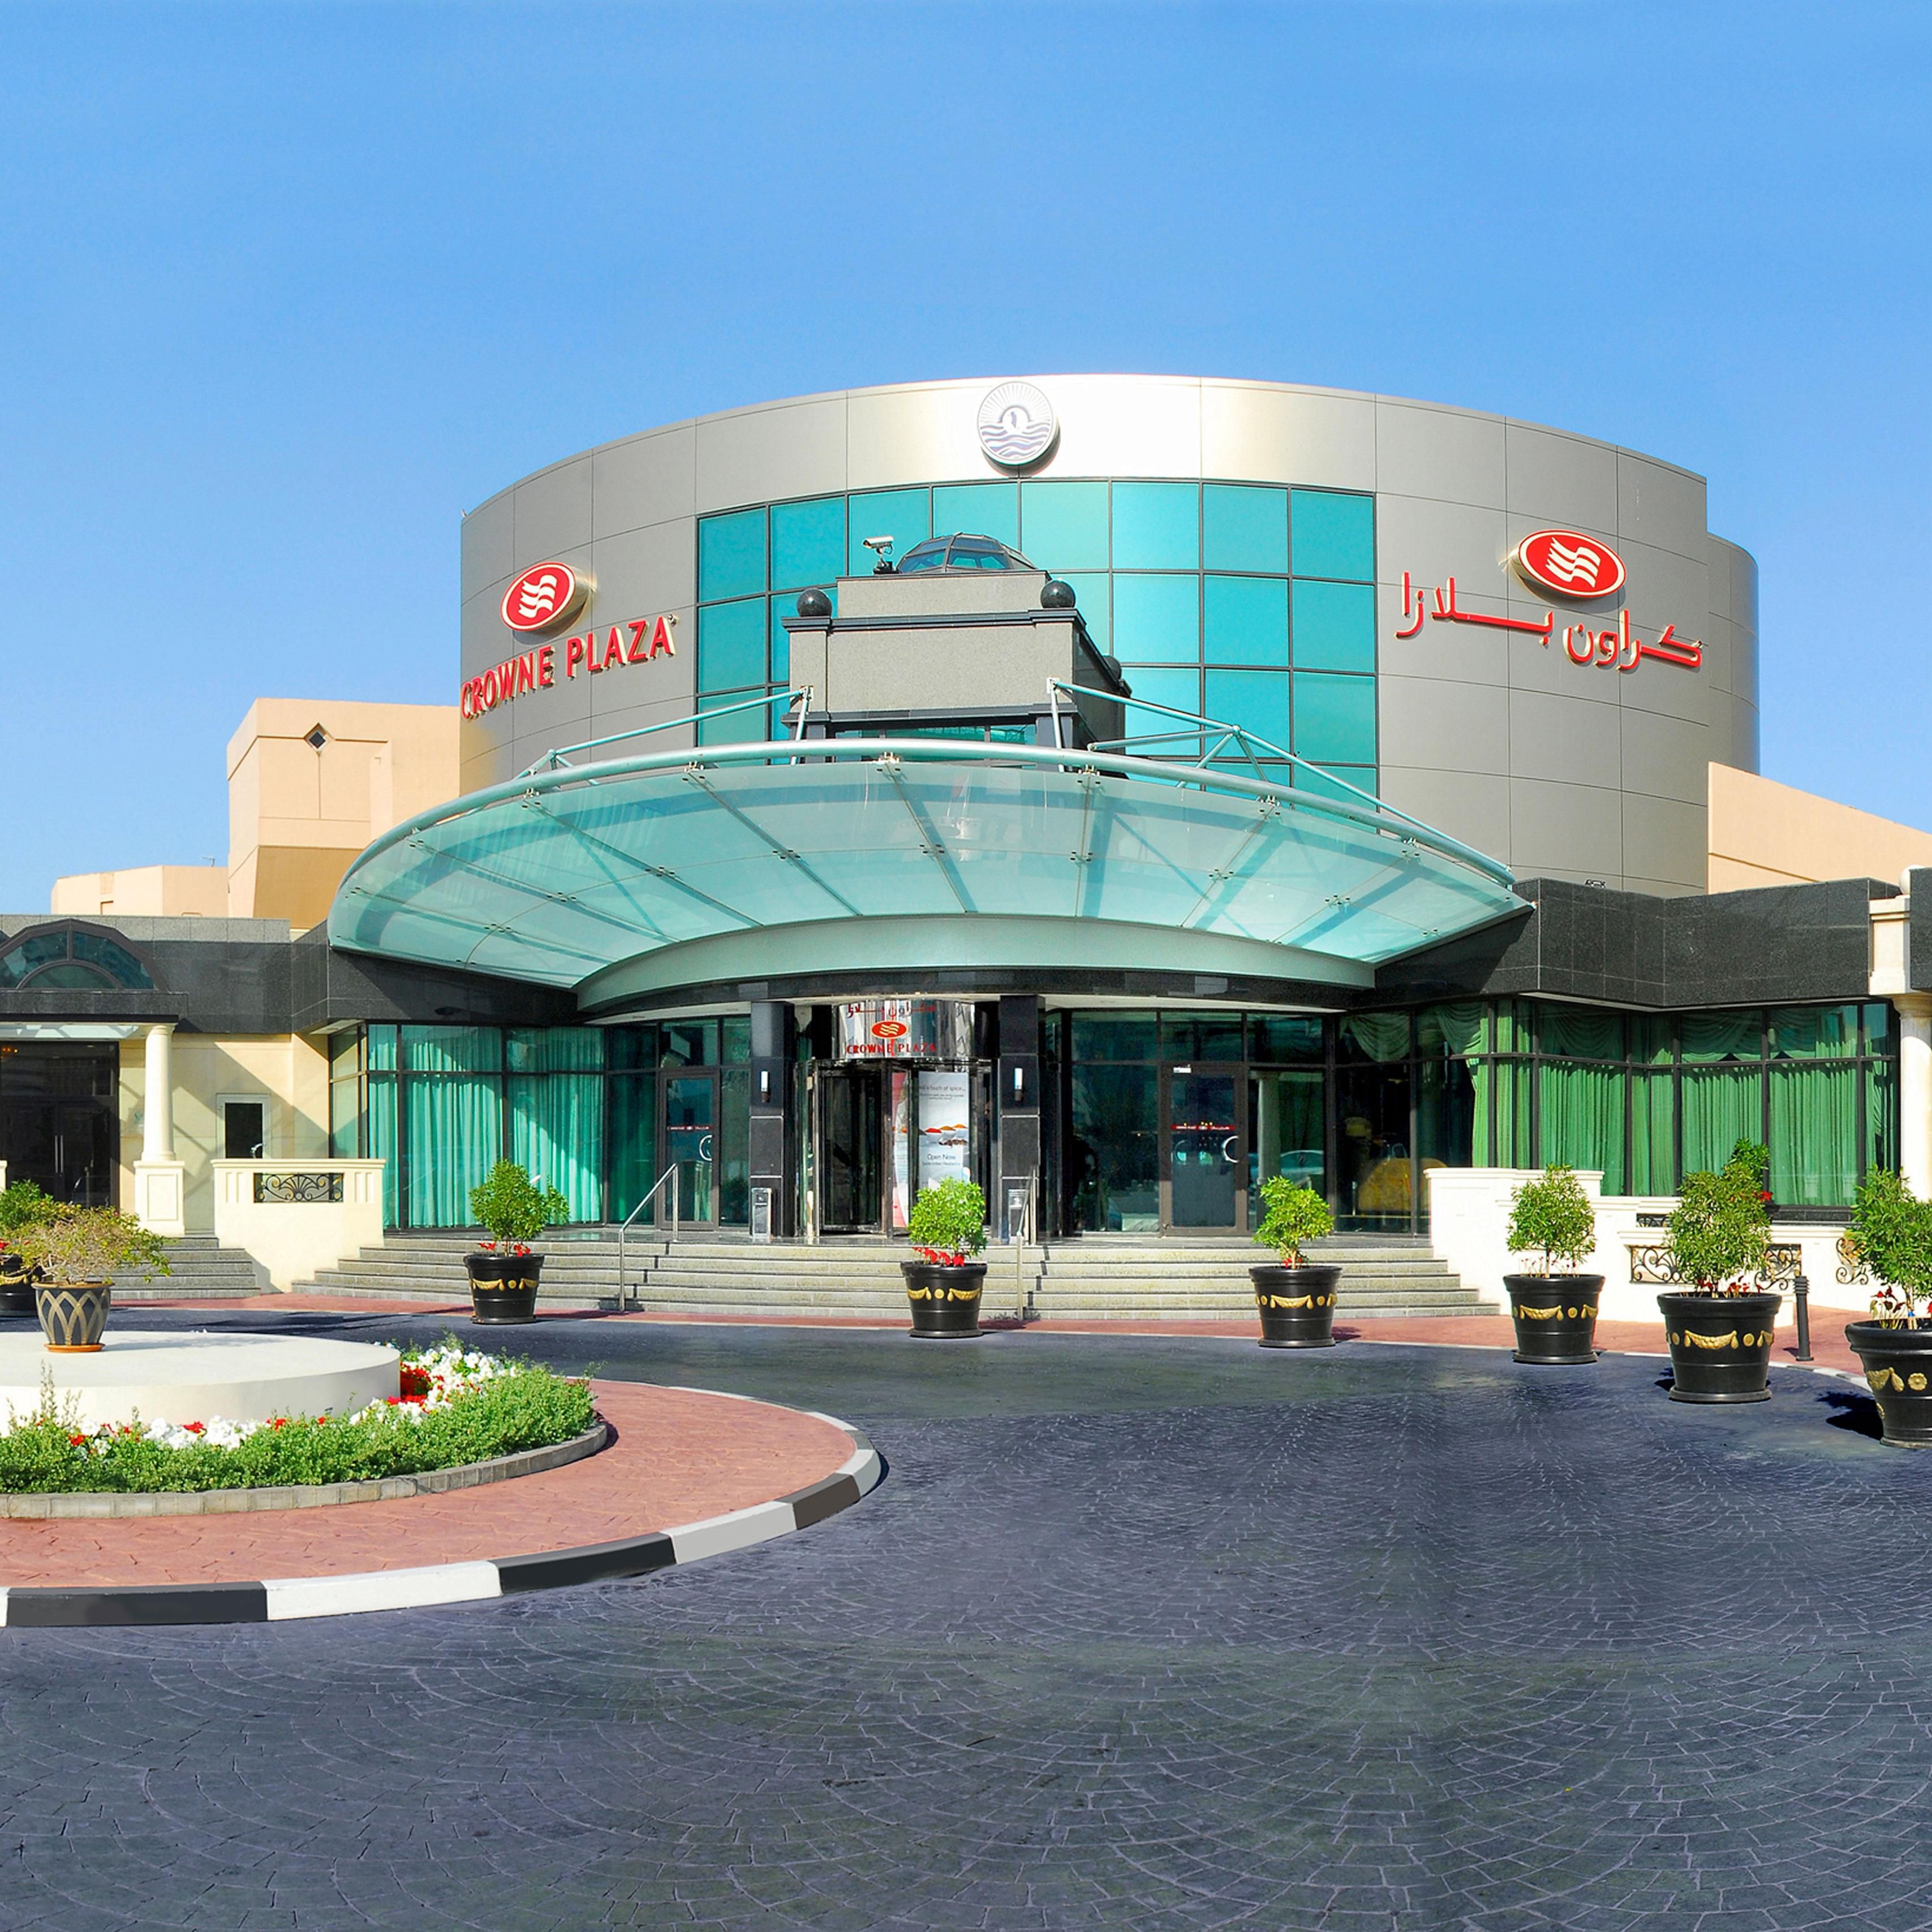 Panaromic view of the hotel entrance